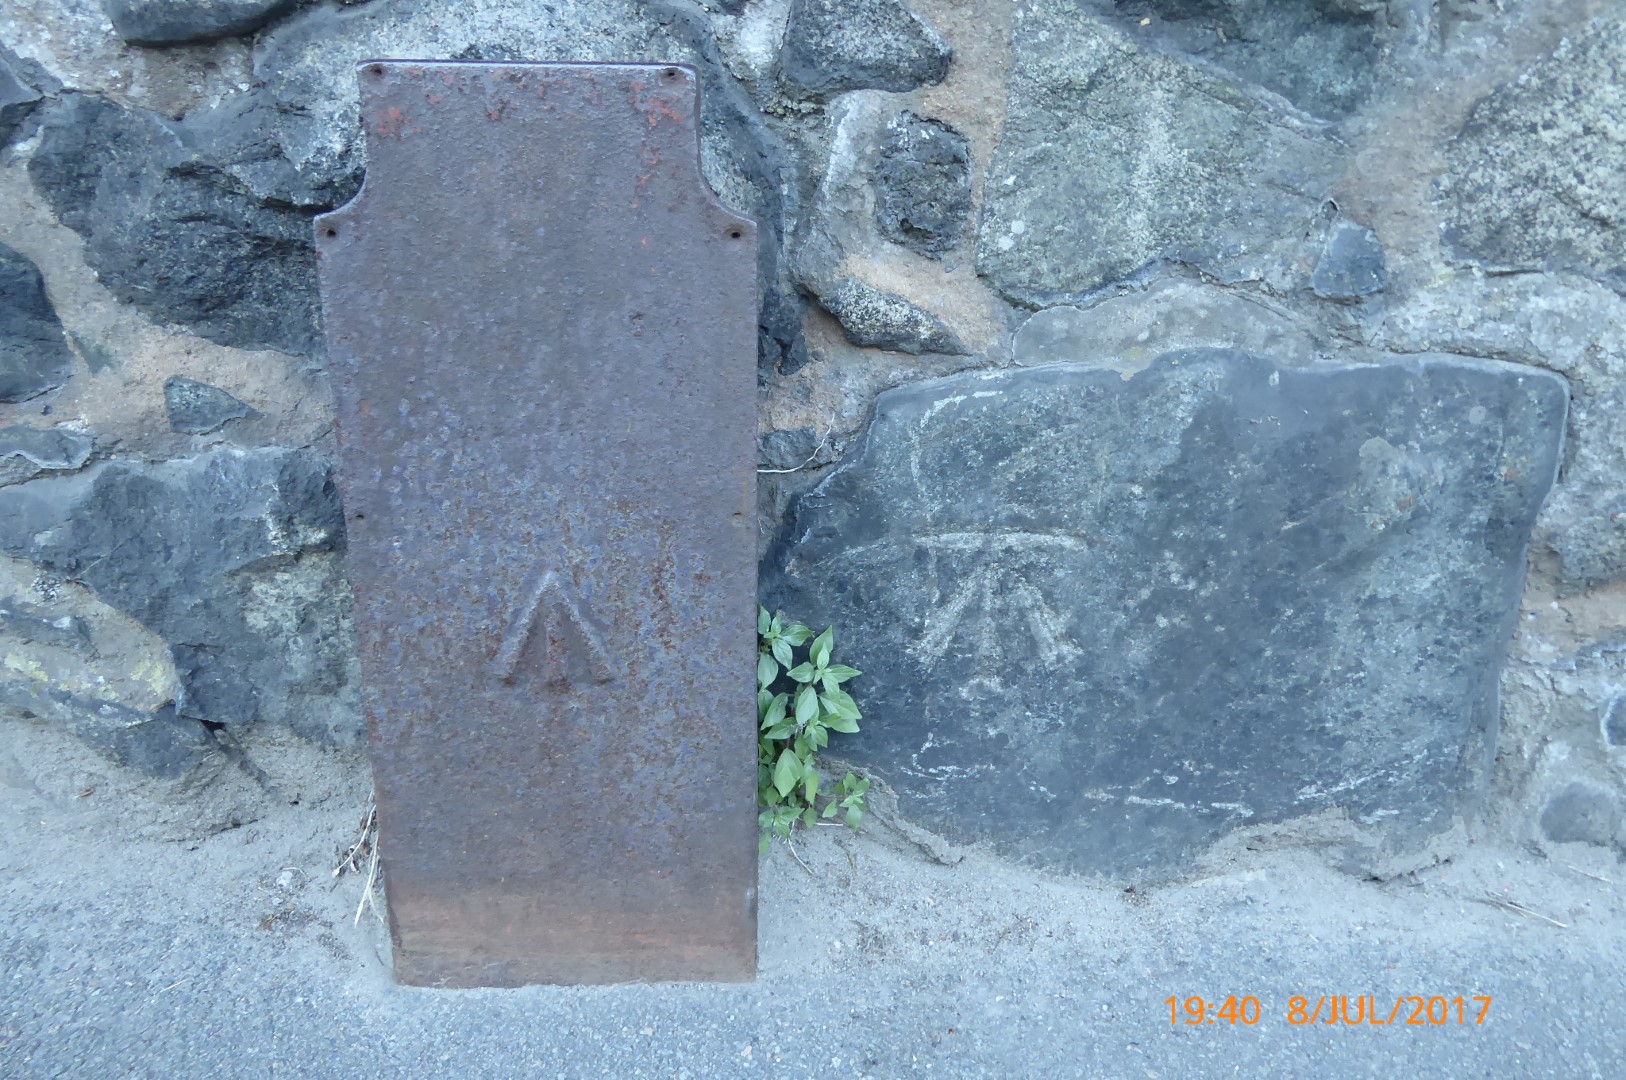 Telegraph cable marker post at E. side of Glategny Esplanade, St Peter Port, Guernsey by Jon Glew 